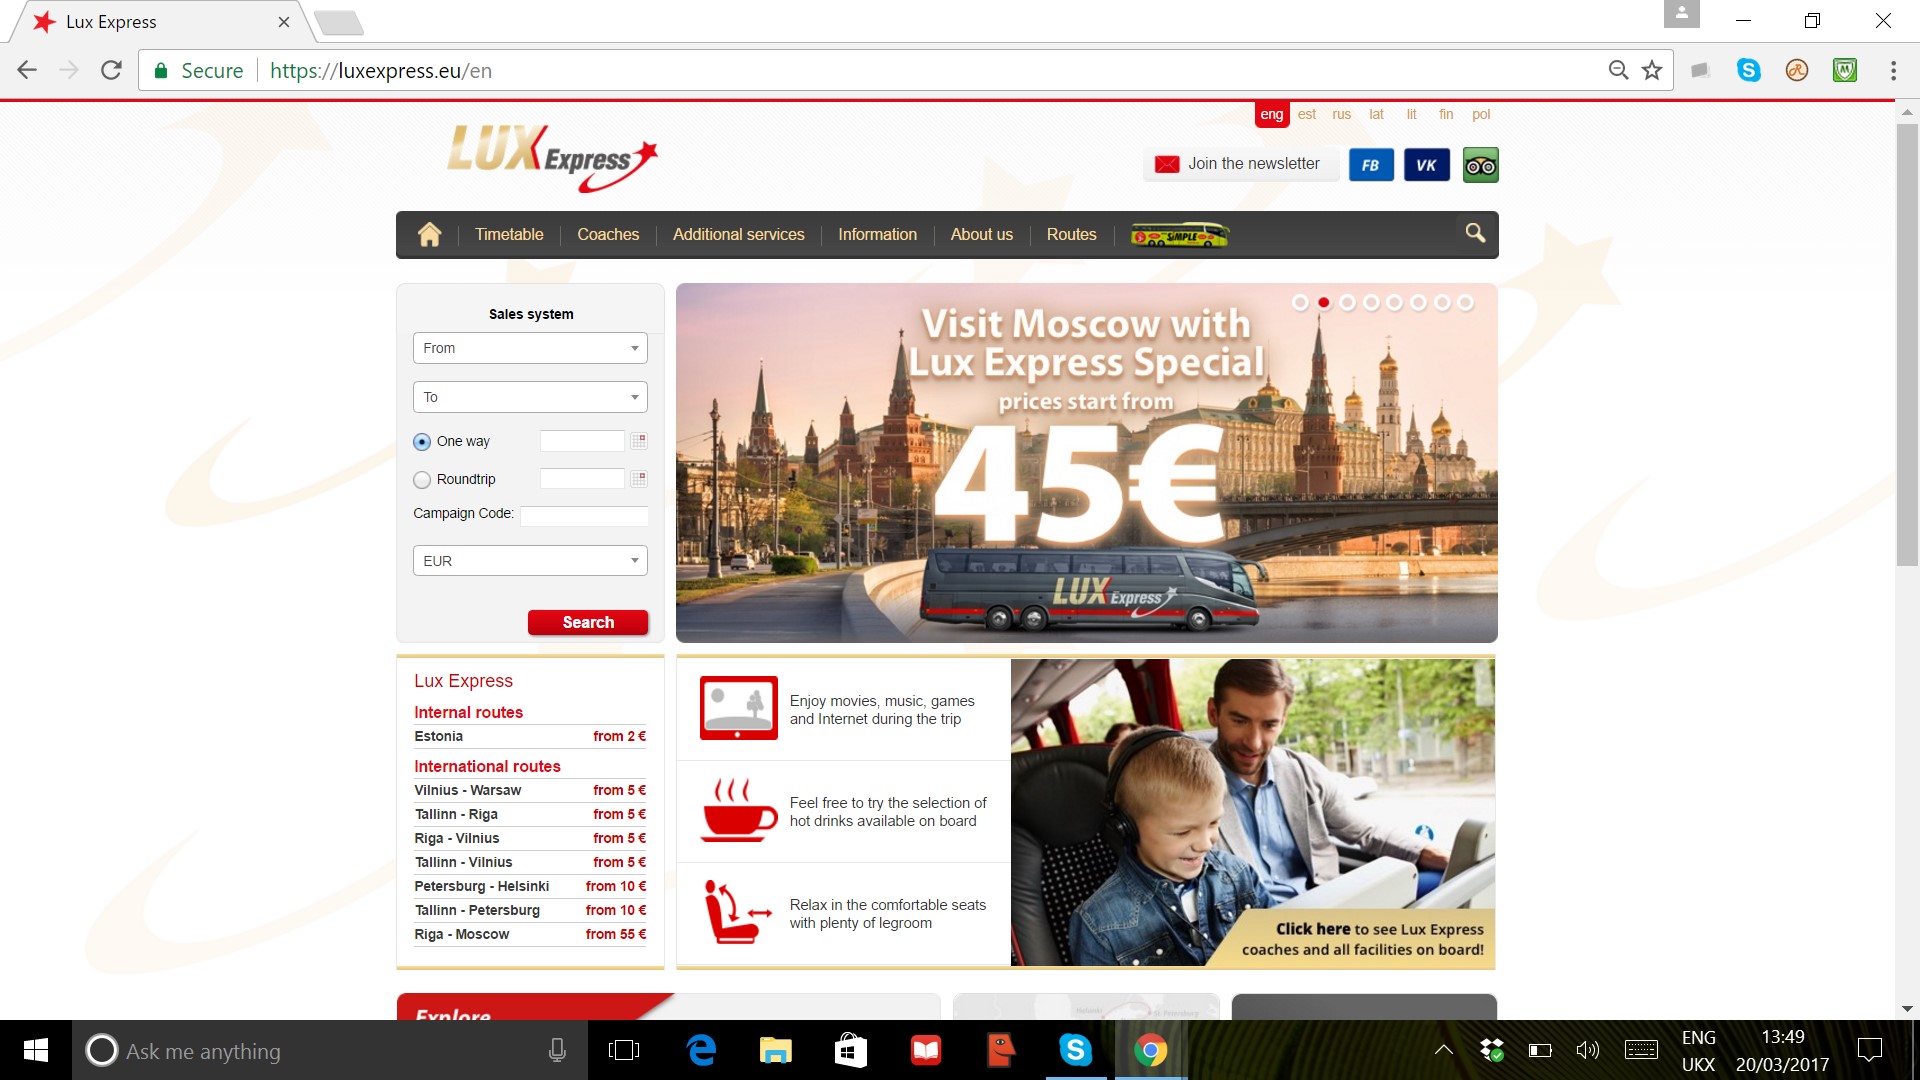 LUX Express Home Page